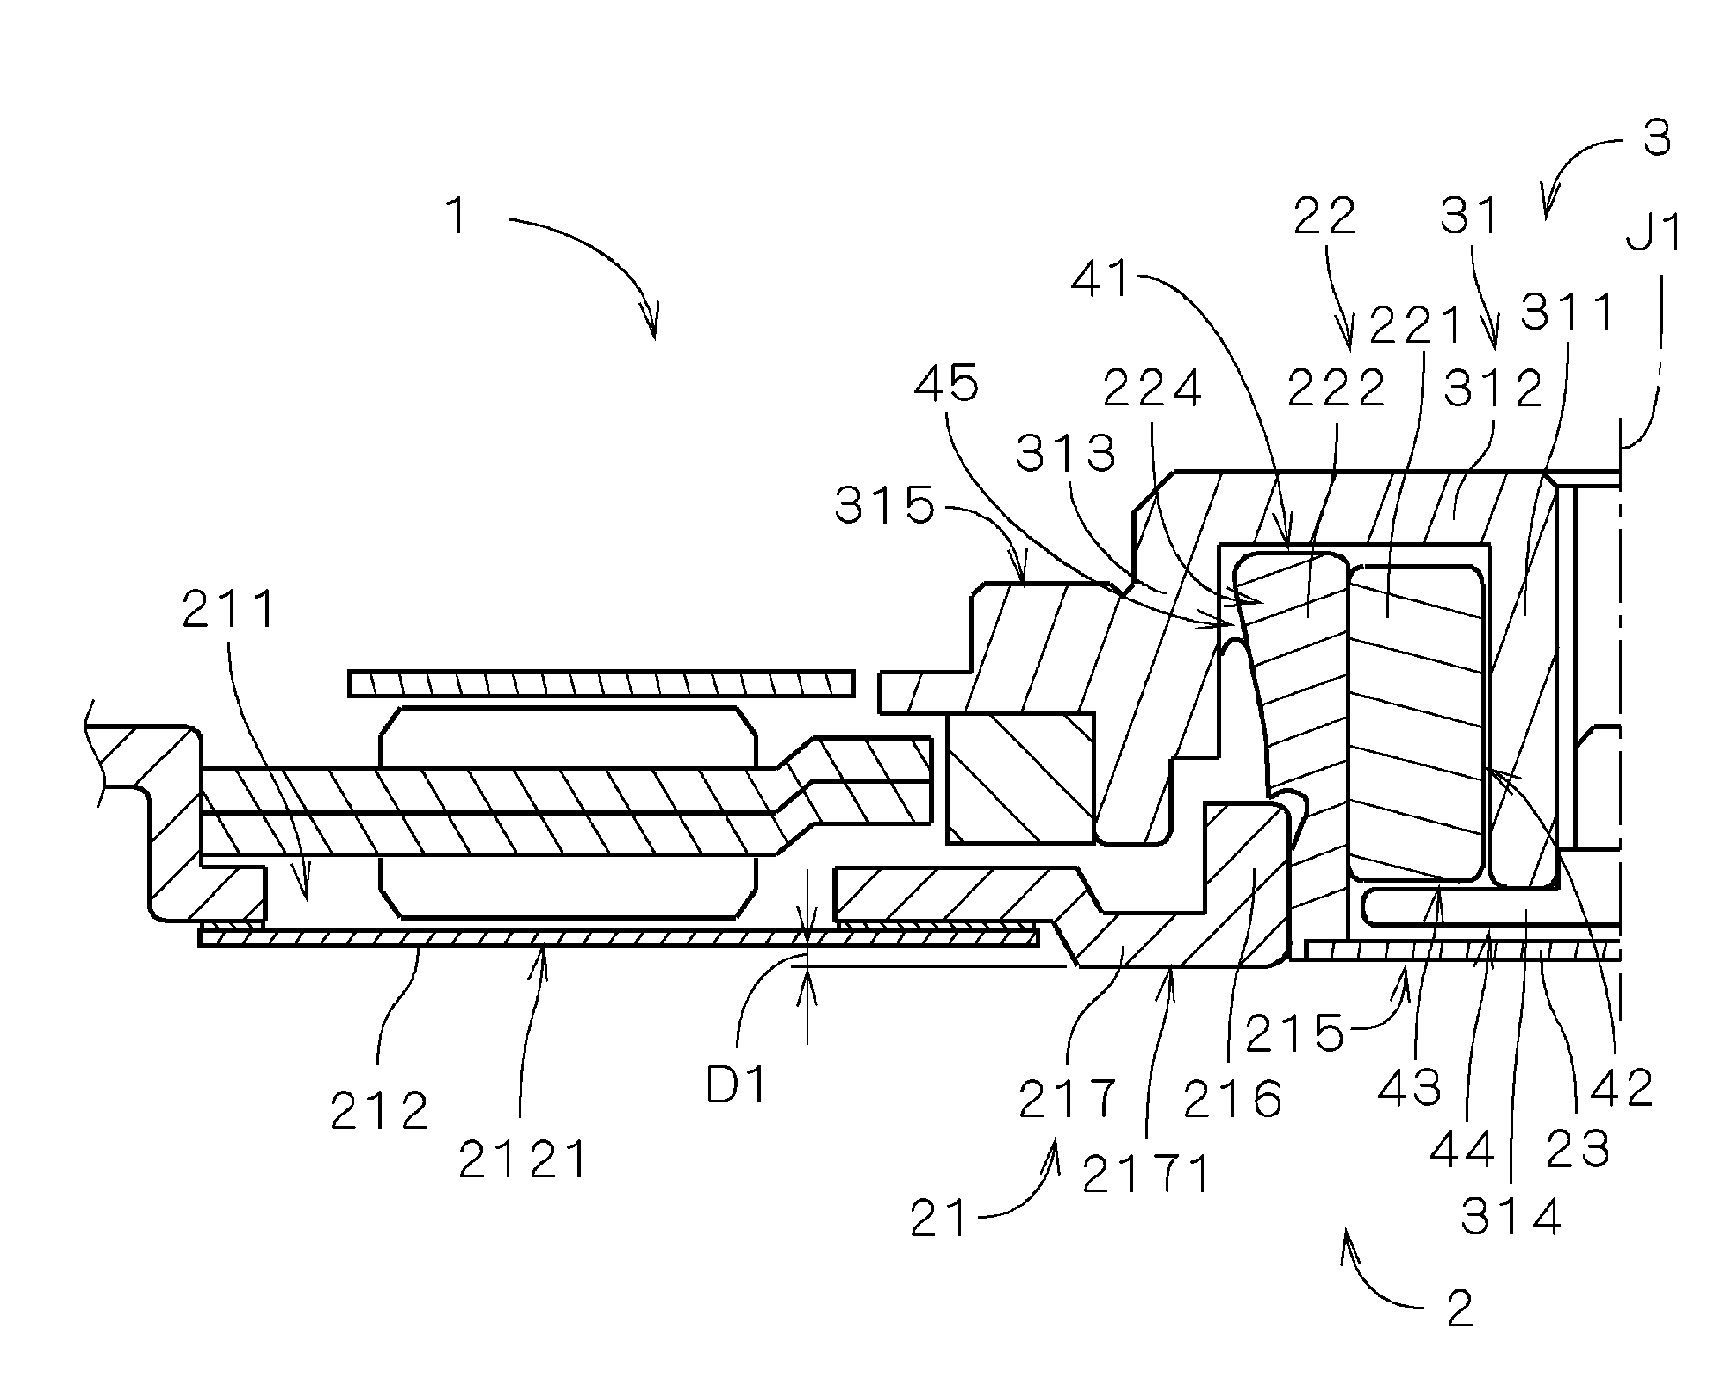 Recording disk driving device motor unit having a sheet member attached to a base